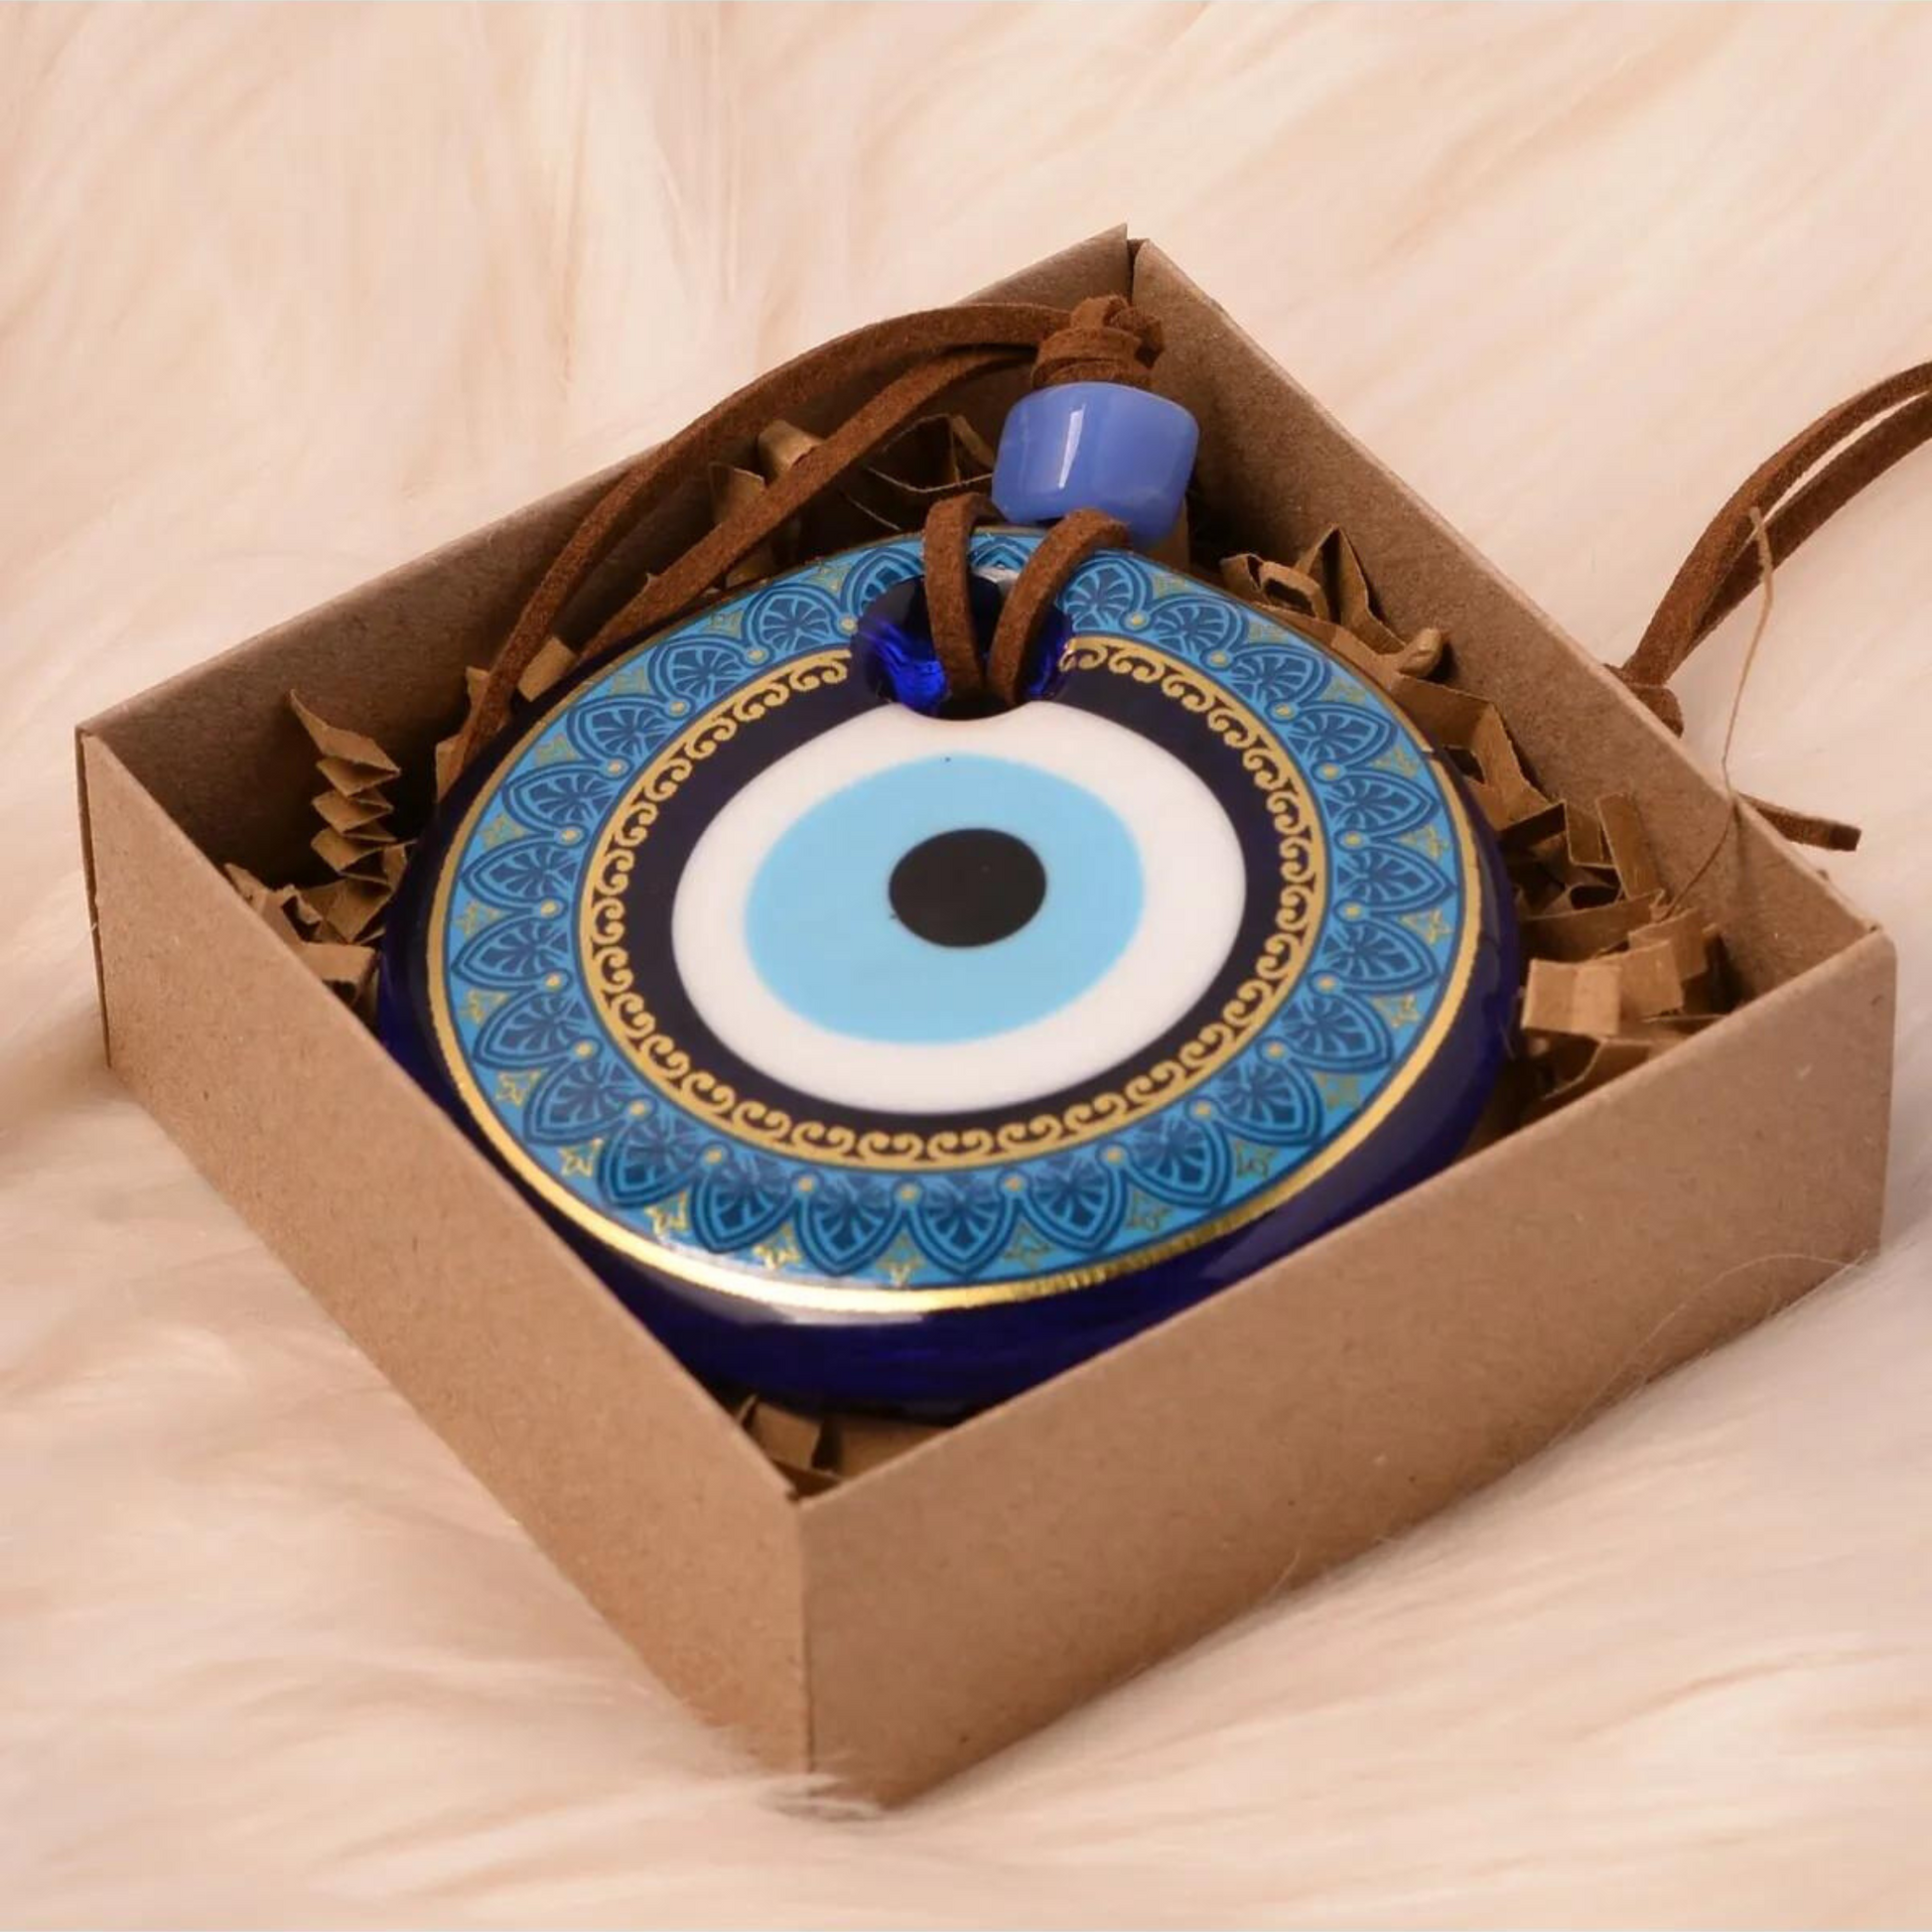 A Nazar wall hanging, adorned with blue and gold details, resting inside a cardboard gift box on a soft, white surface